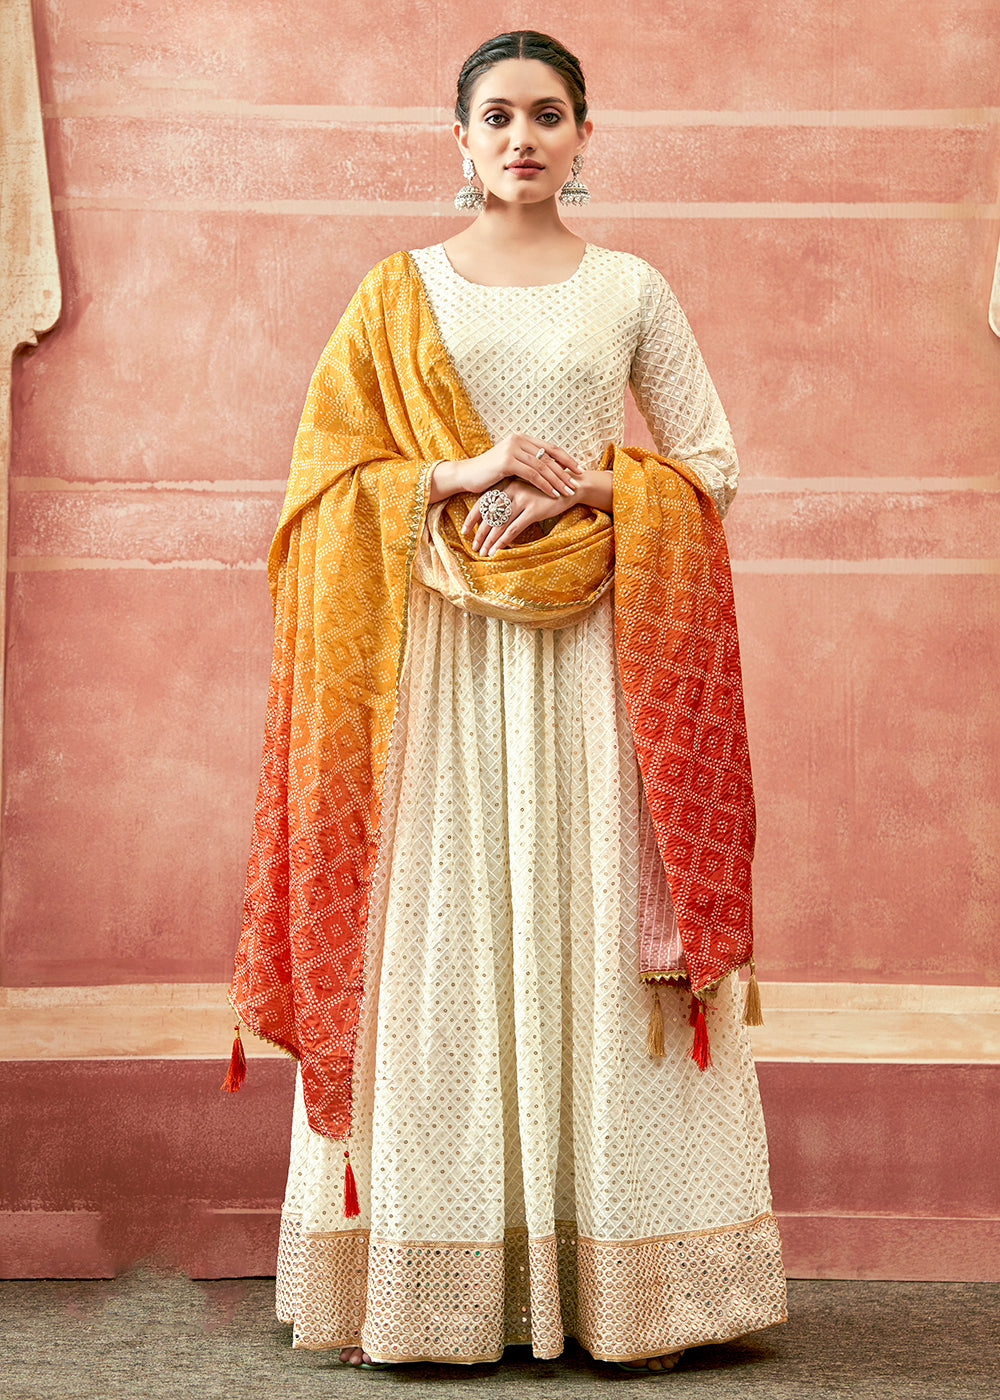 Buy Now Daisy White Traditional Anarkali with Orange Ombre Bandhni Dupatta Online in USA, UK, Australia, New Zealand, Canada & Worldwide at Empress Clothing. 